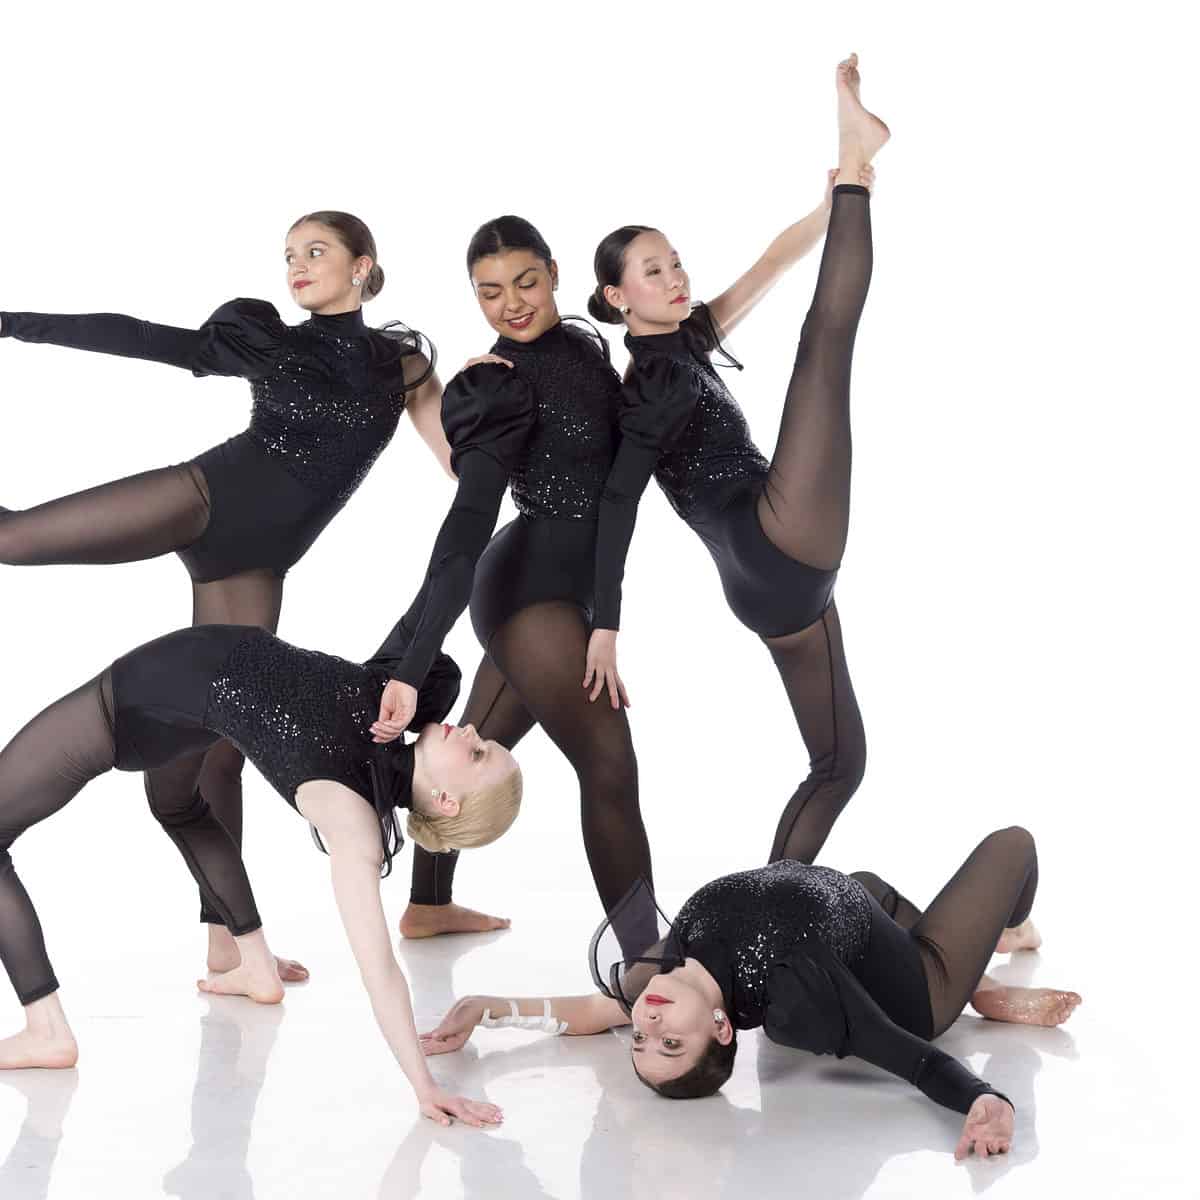 Savage Jazz Dance Company - The Savage Jazz Dance Company presents Sketches  of Oakland, featuring World Premiere dance pieces choreographed by Artistic  Director Reginald Ray-Savage, original compositions by Leslie La Barre, with